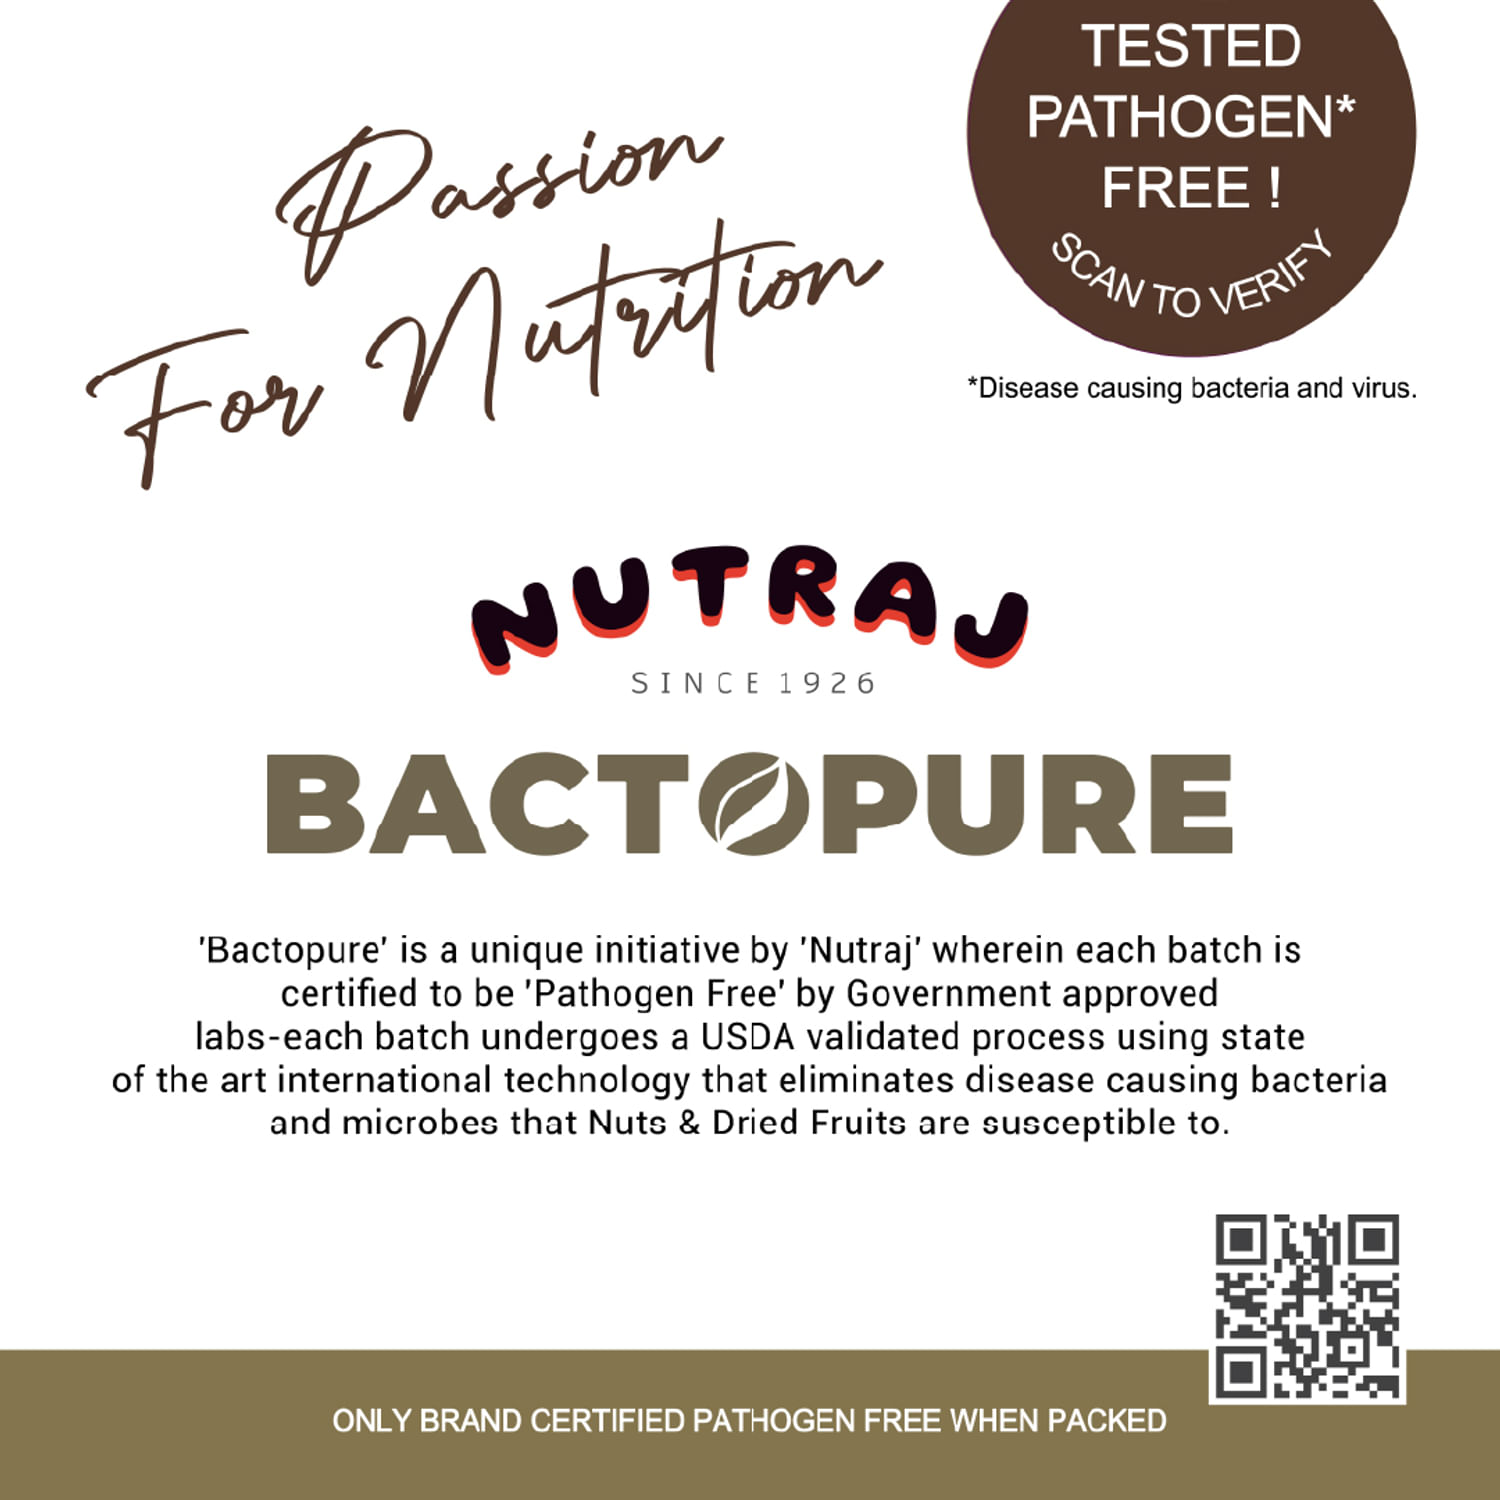 Bactopure Walnut Inshell 500 gm - Pack of 2